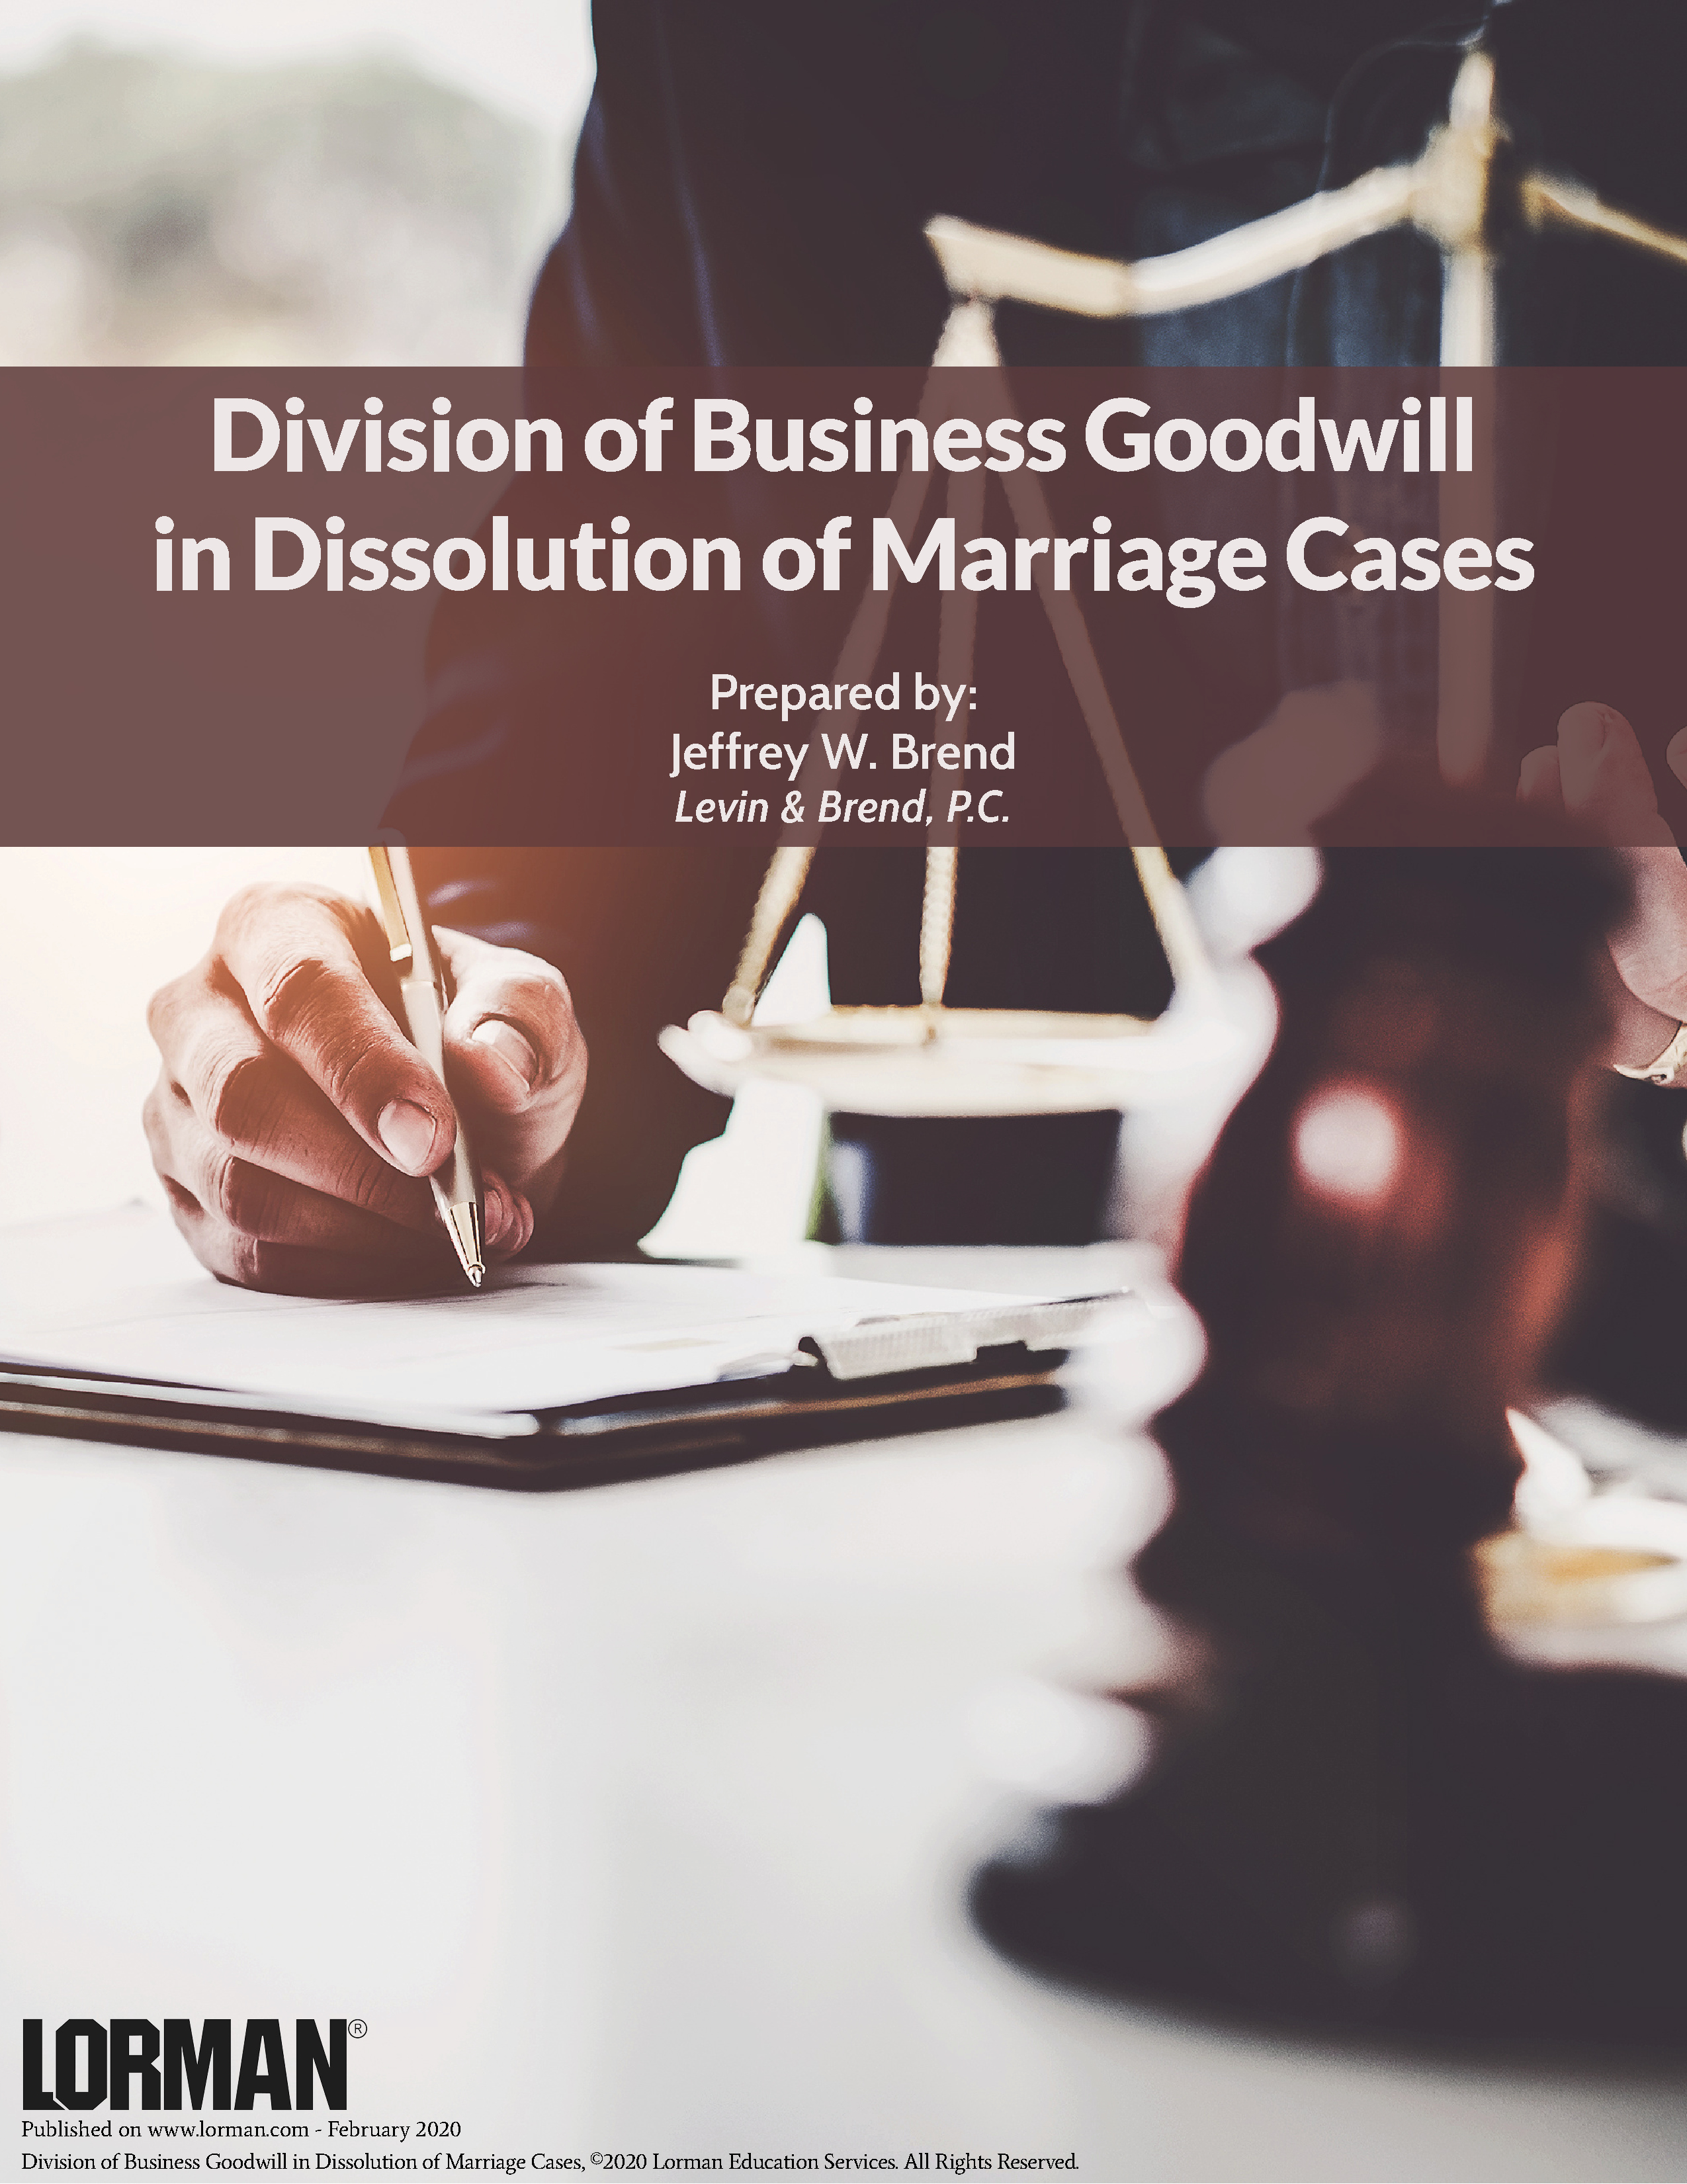 Division of Business Goodwill in Dissolution of Marriage Cases